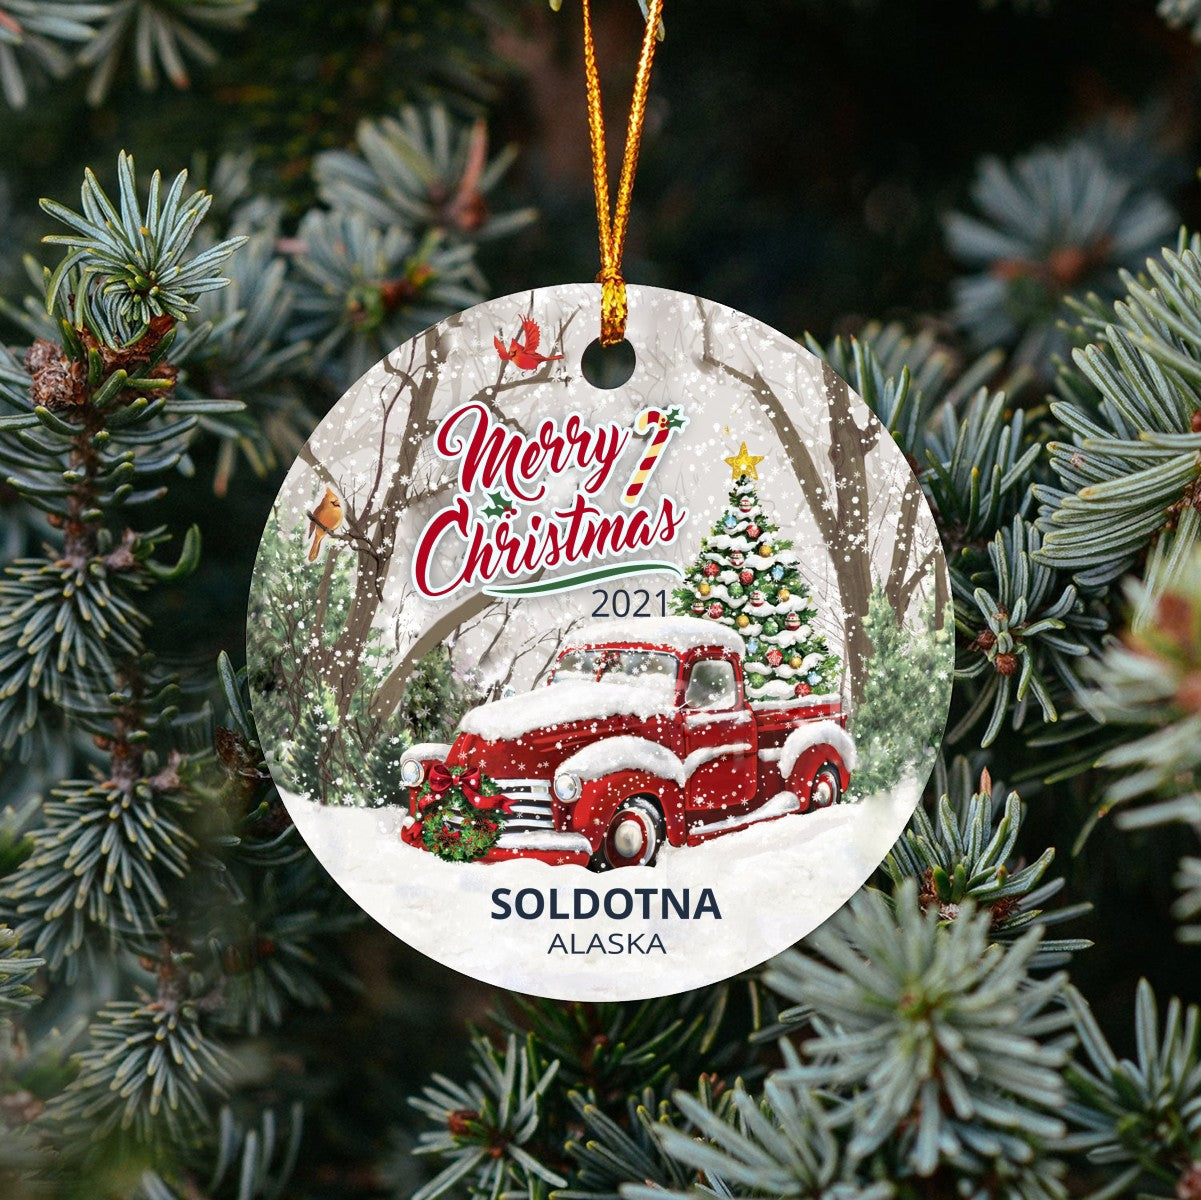 Christmas Tree Ornaments Soldotna - Ornament Customize With Name City And State Soldotna Alaska AK - Red Truck Xmas Ornaments 3'' Plastic Gift For Family, Friend And Housewarming